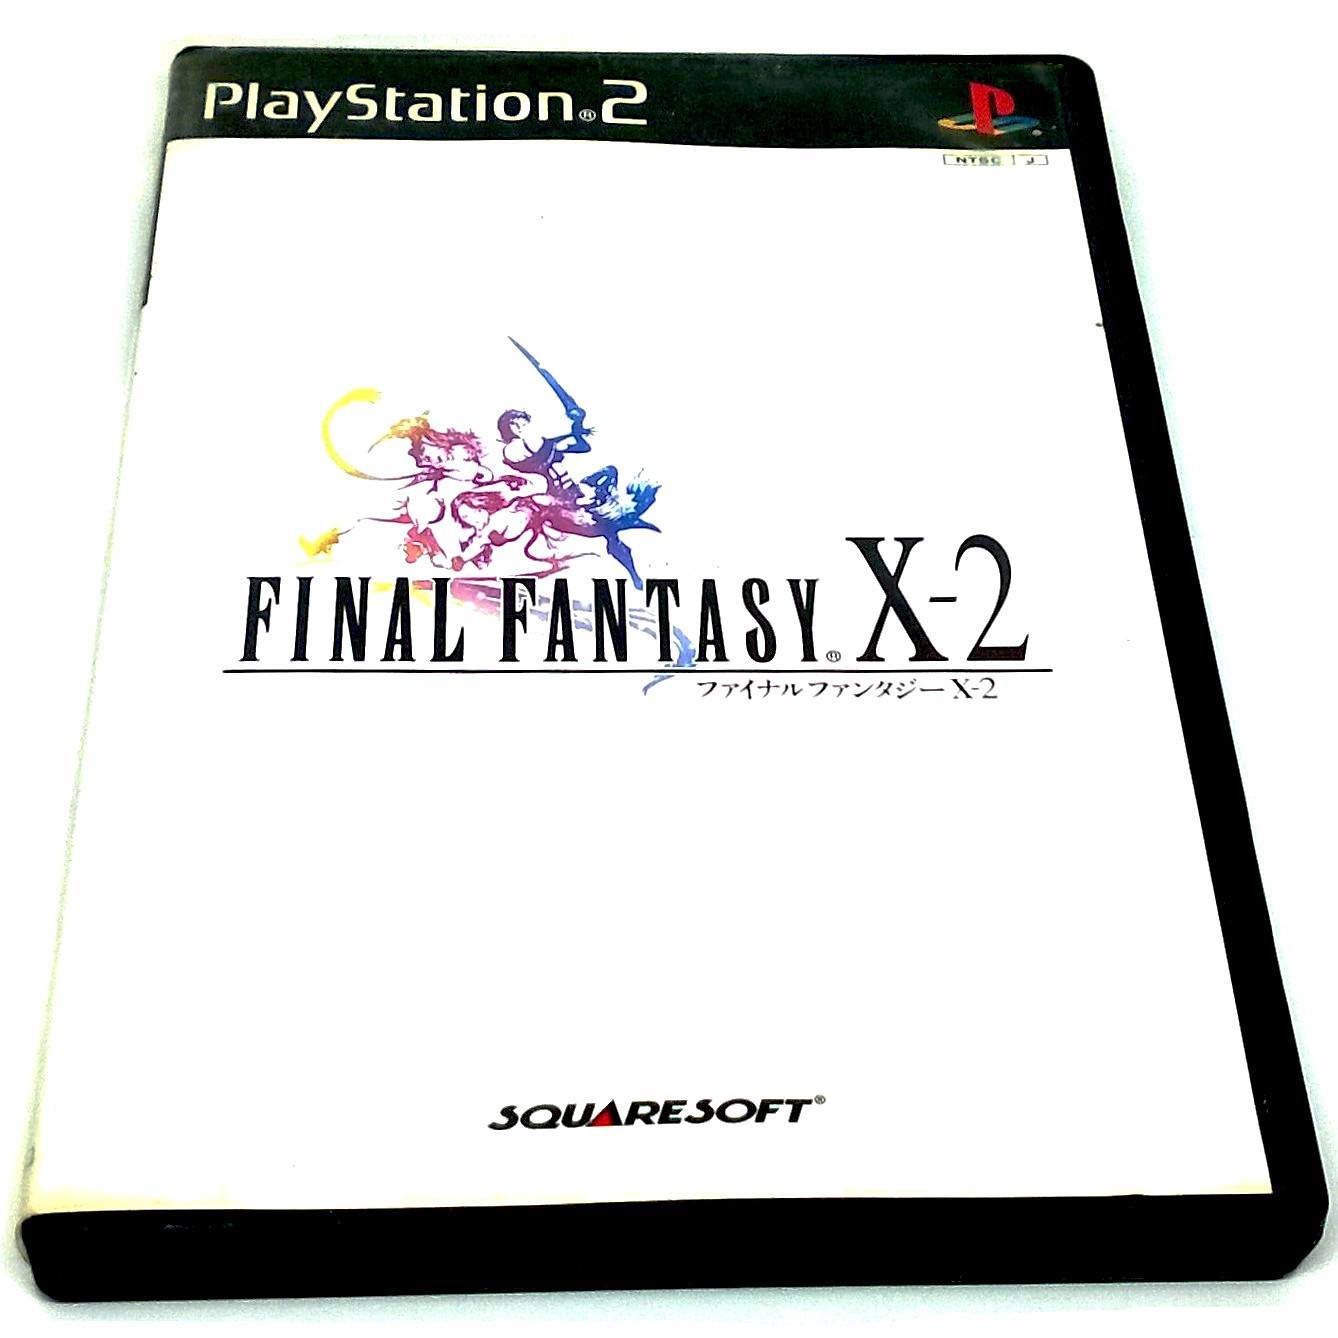 Final Fantasy X-2 for PlayStation 2 (Import) - Front of case